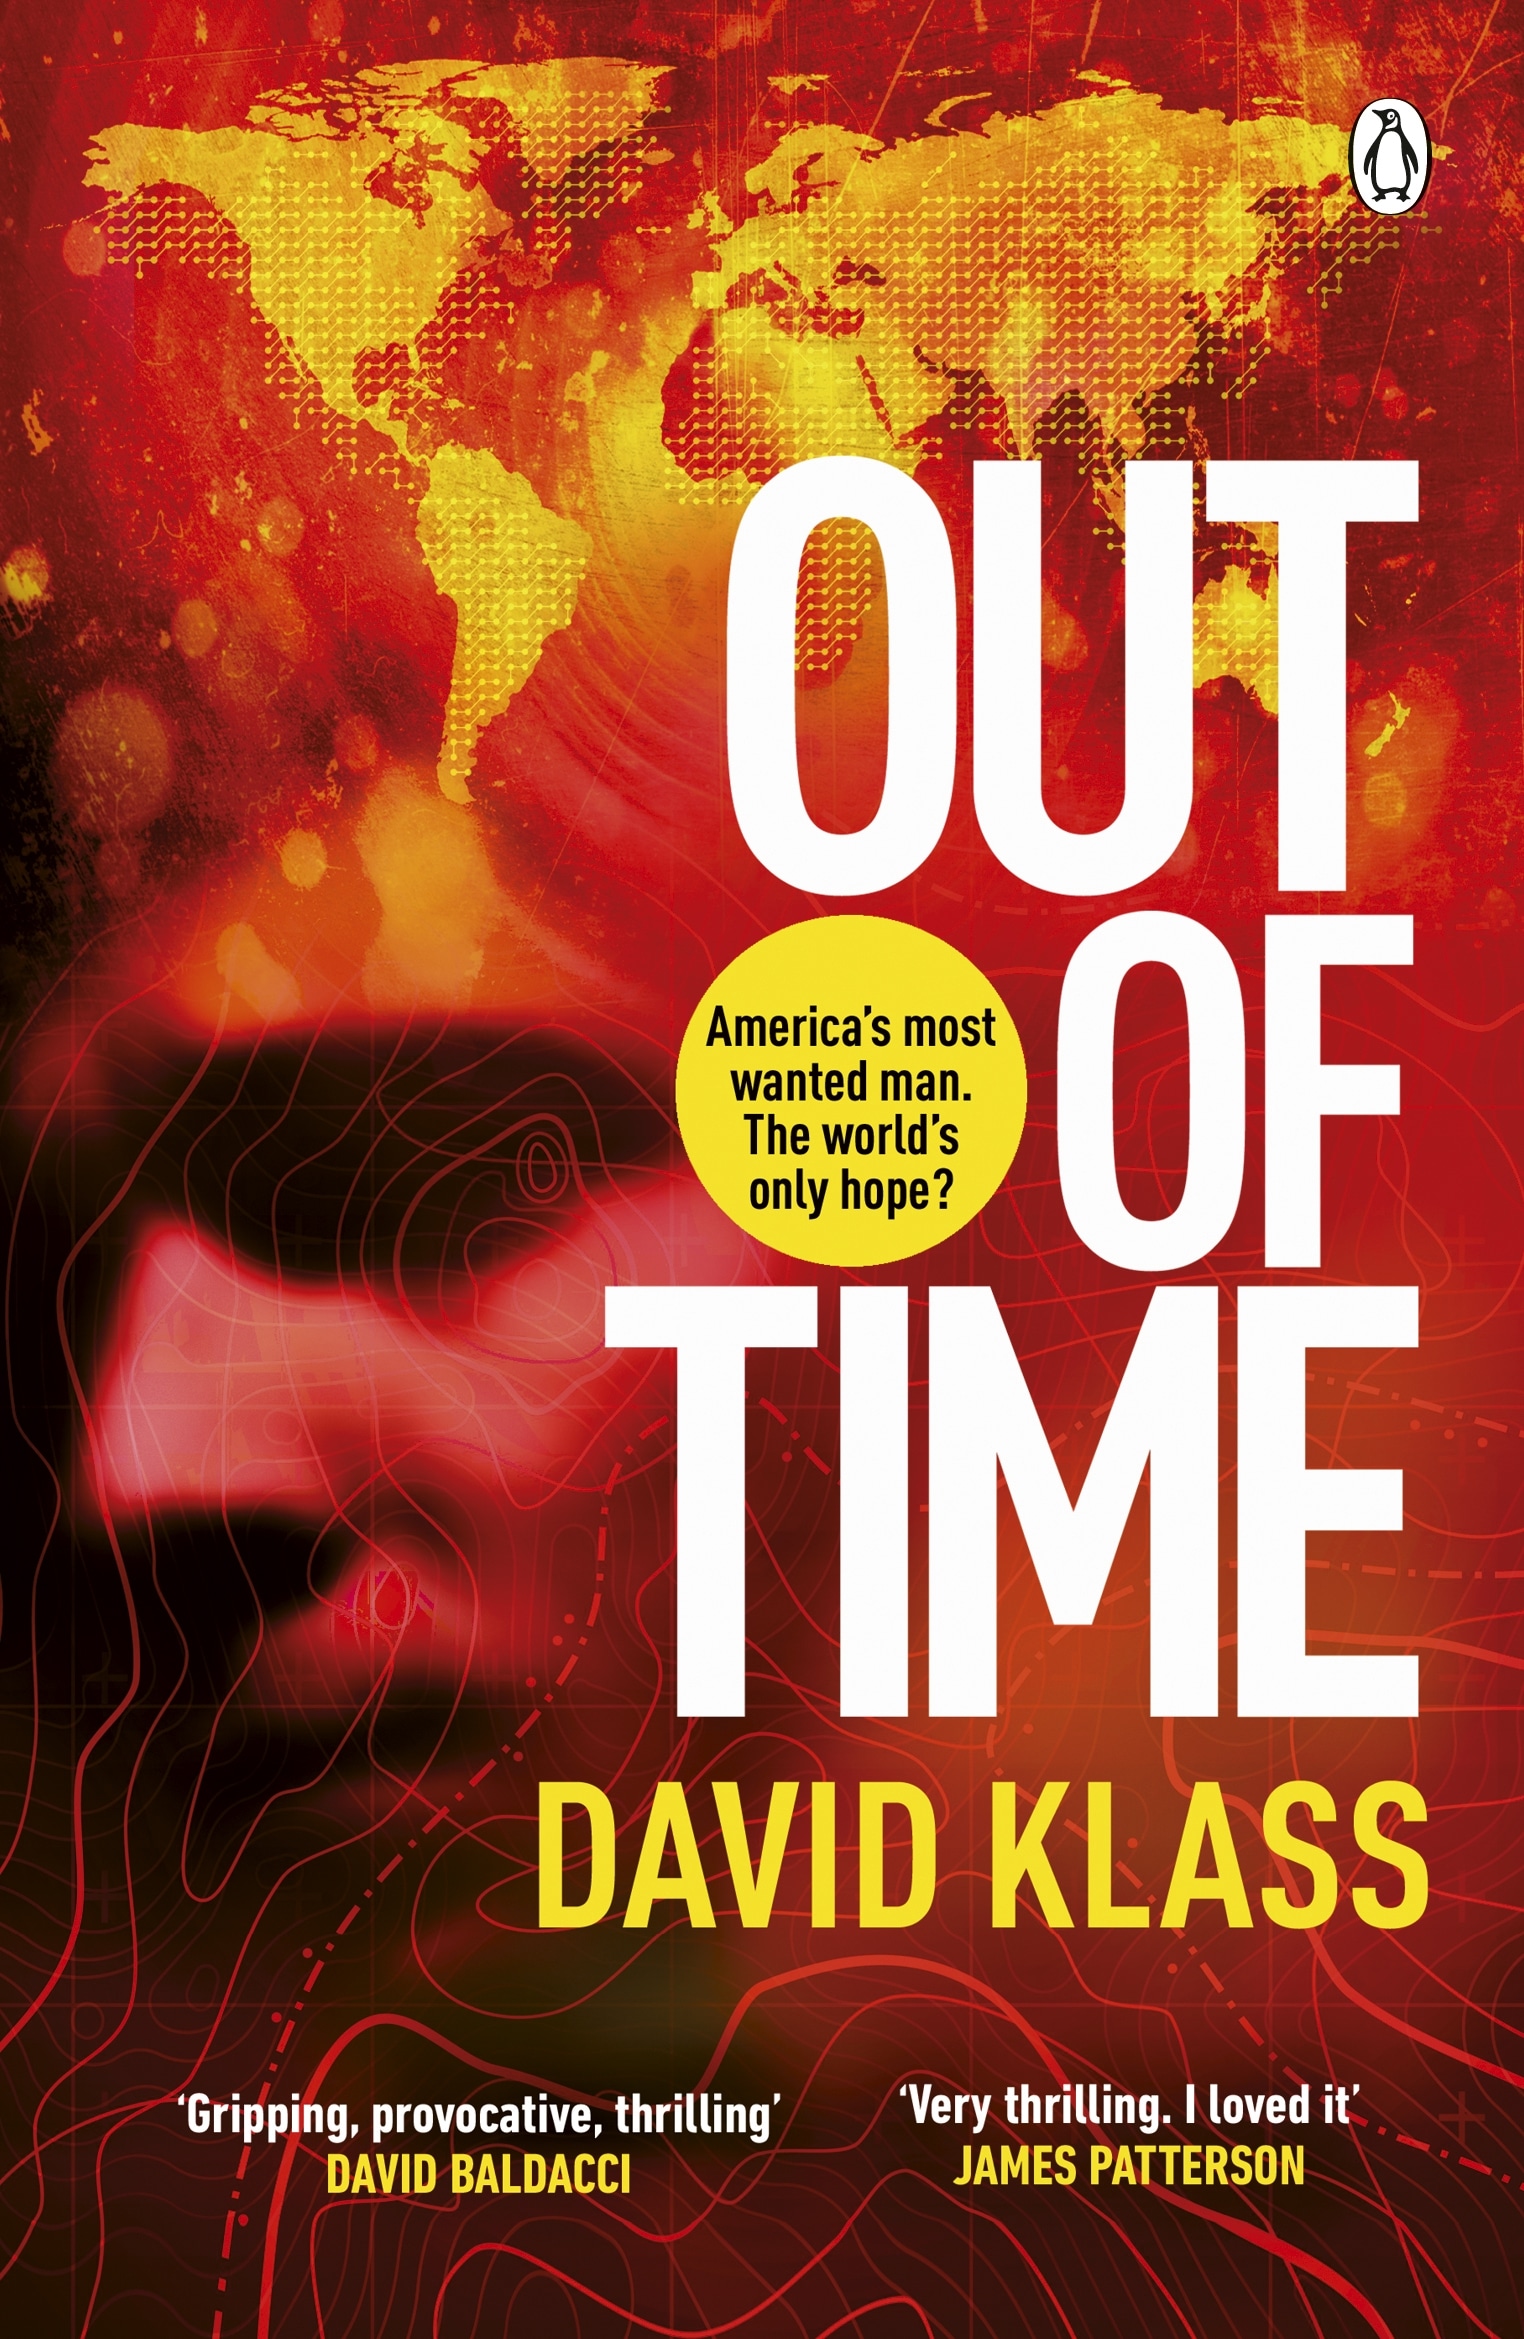 Book “Out of Time” by David Klass — June 10, 2021